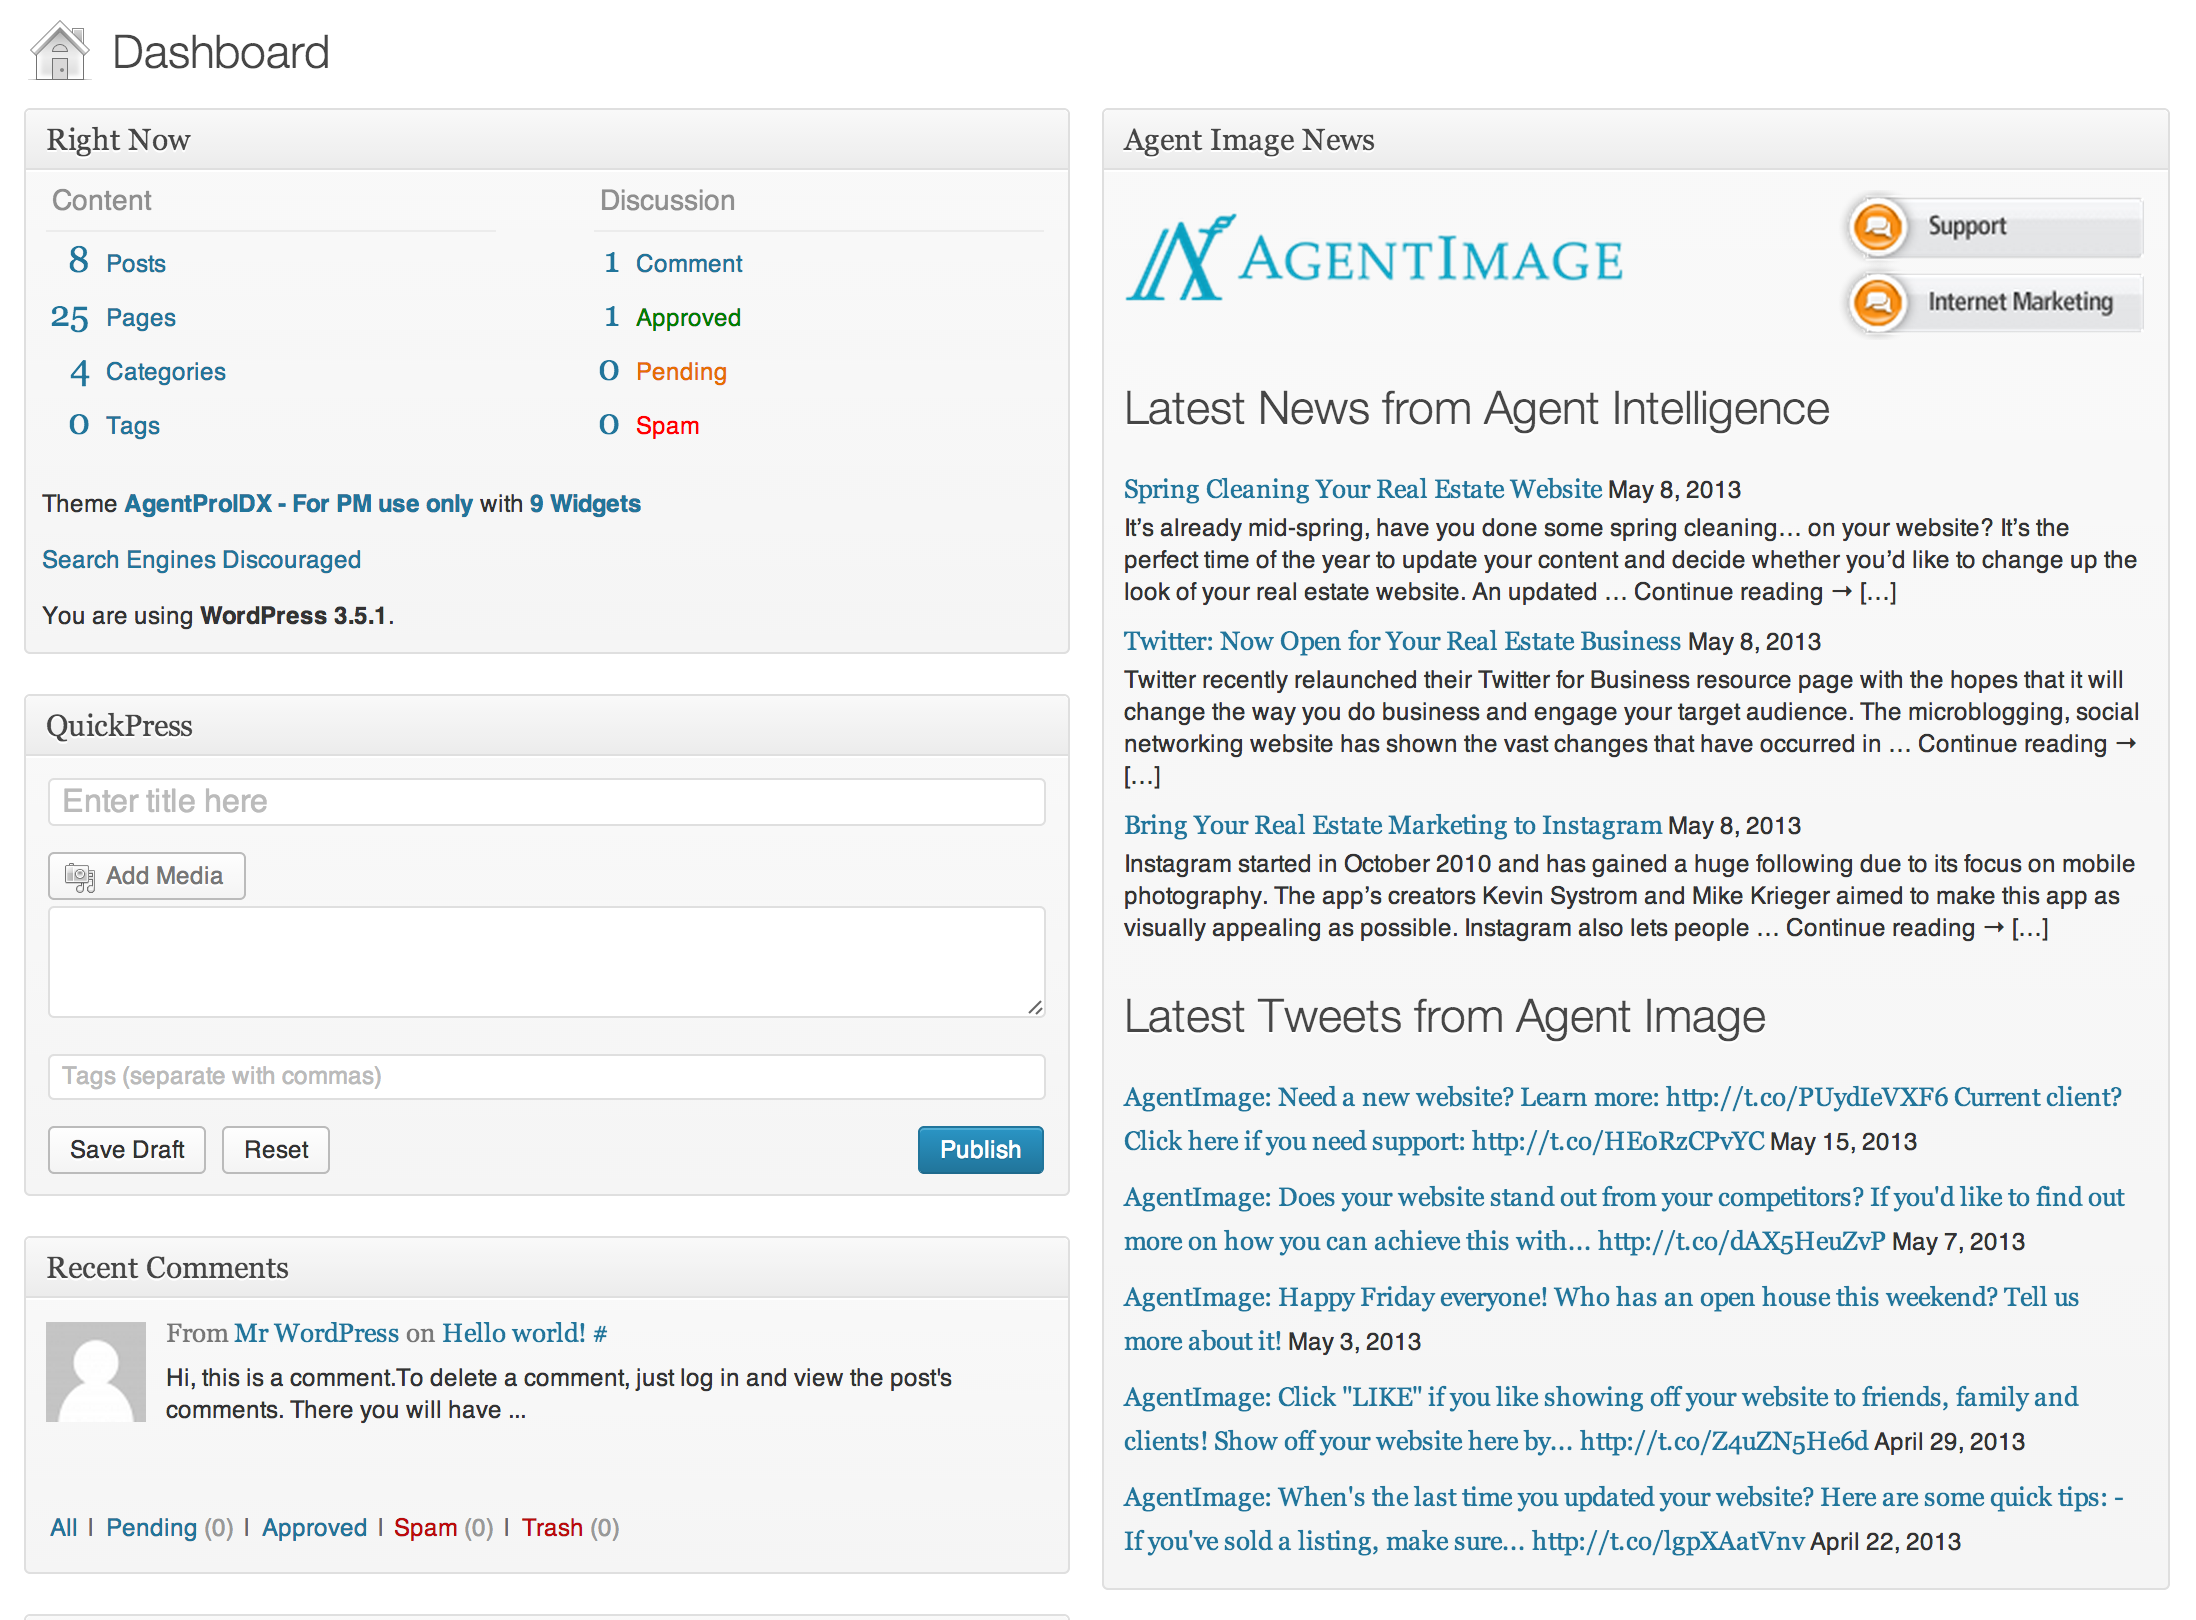 The plugin creates a widget on your Dashboard. Stay up to date from Agent Image!